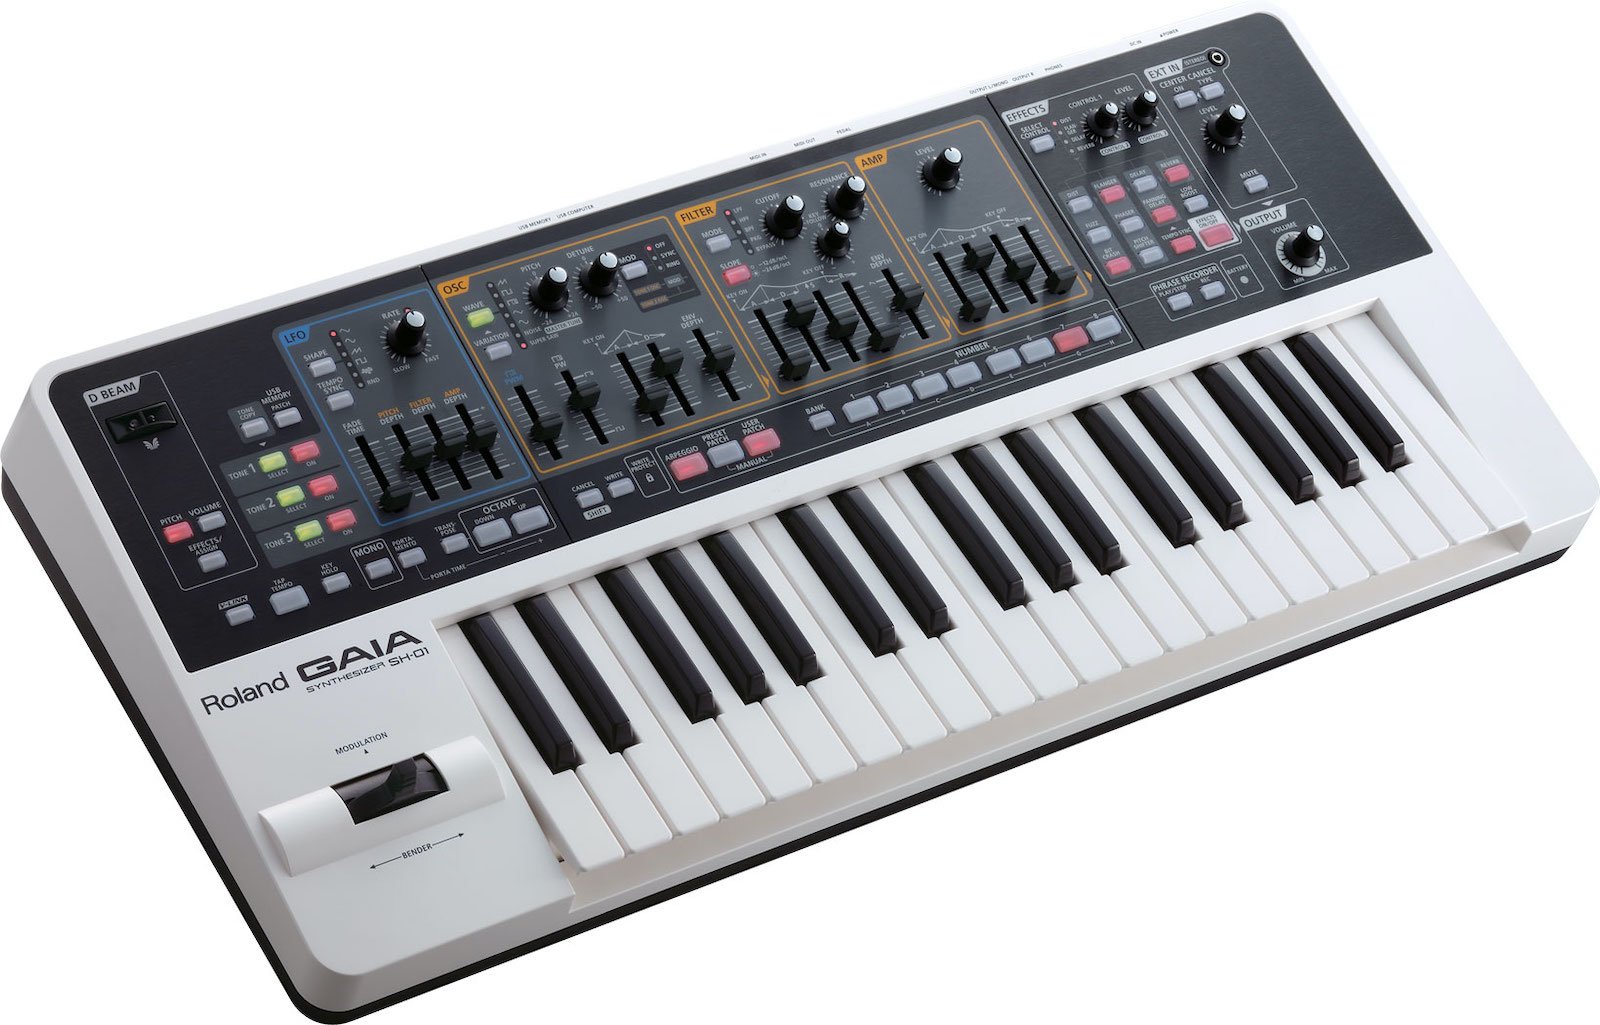 The Roland GAIA SH-01—one of their most popular synthesizer offerings of the 21st century.